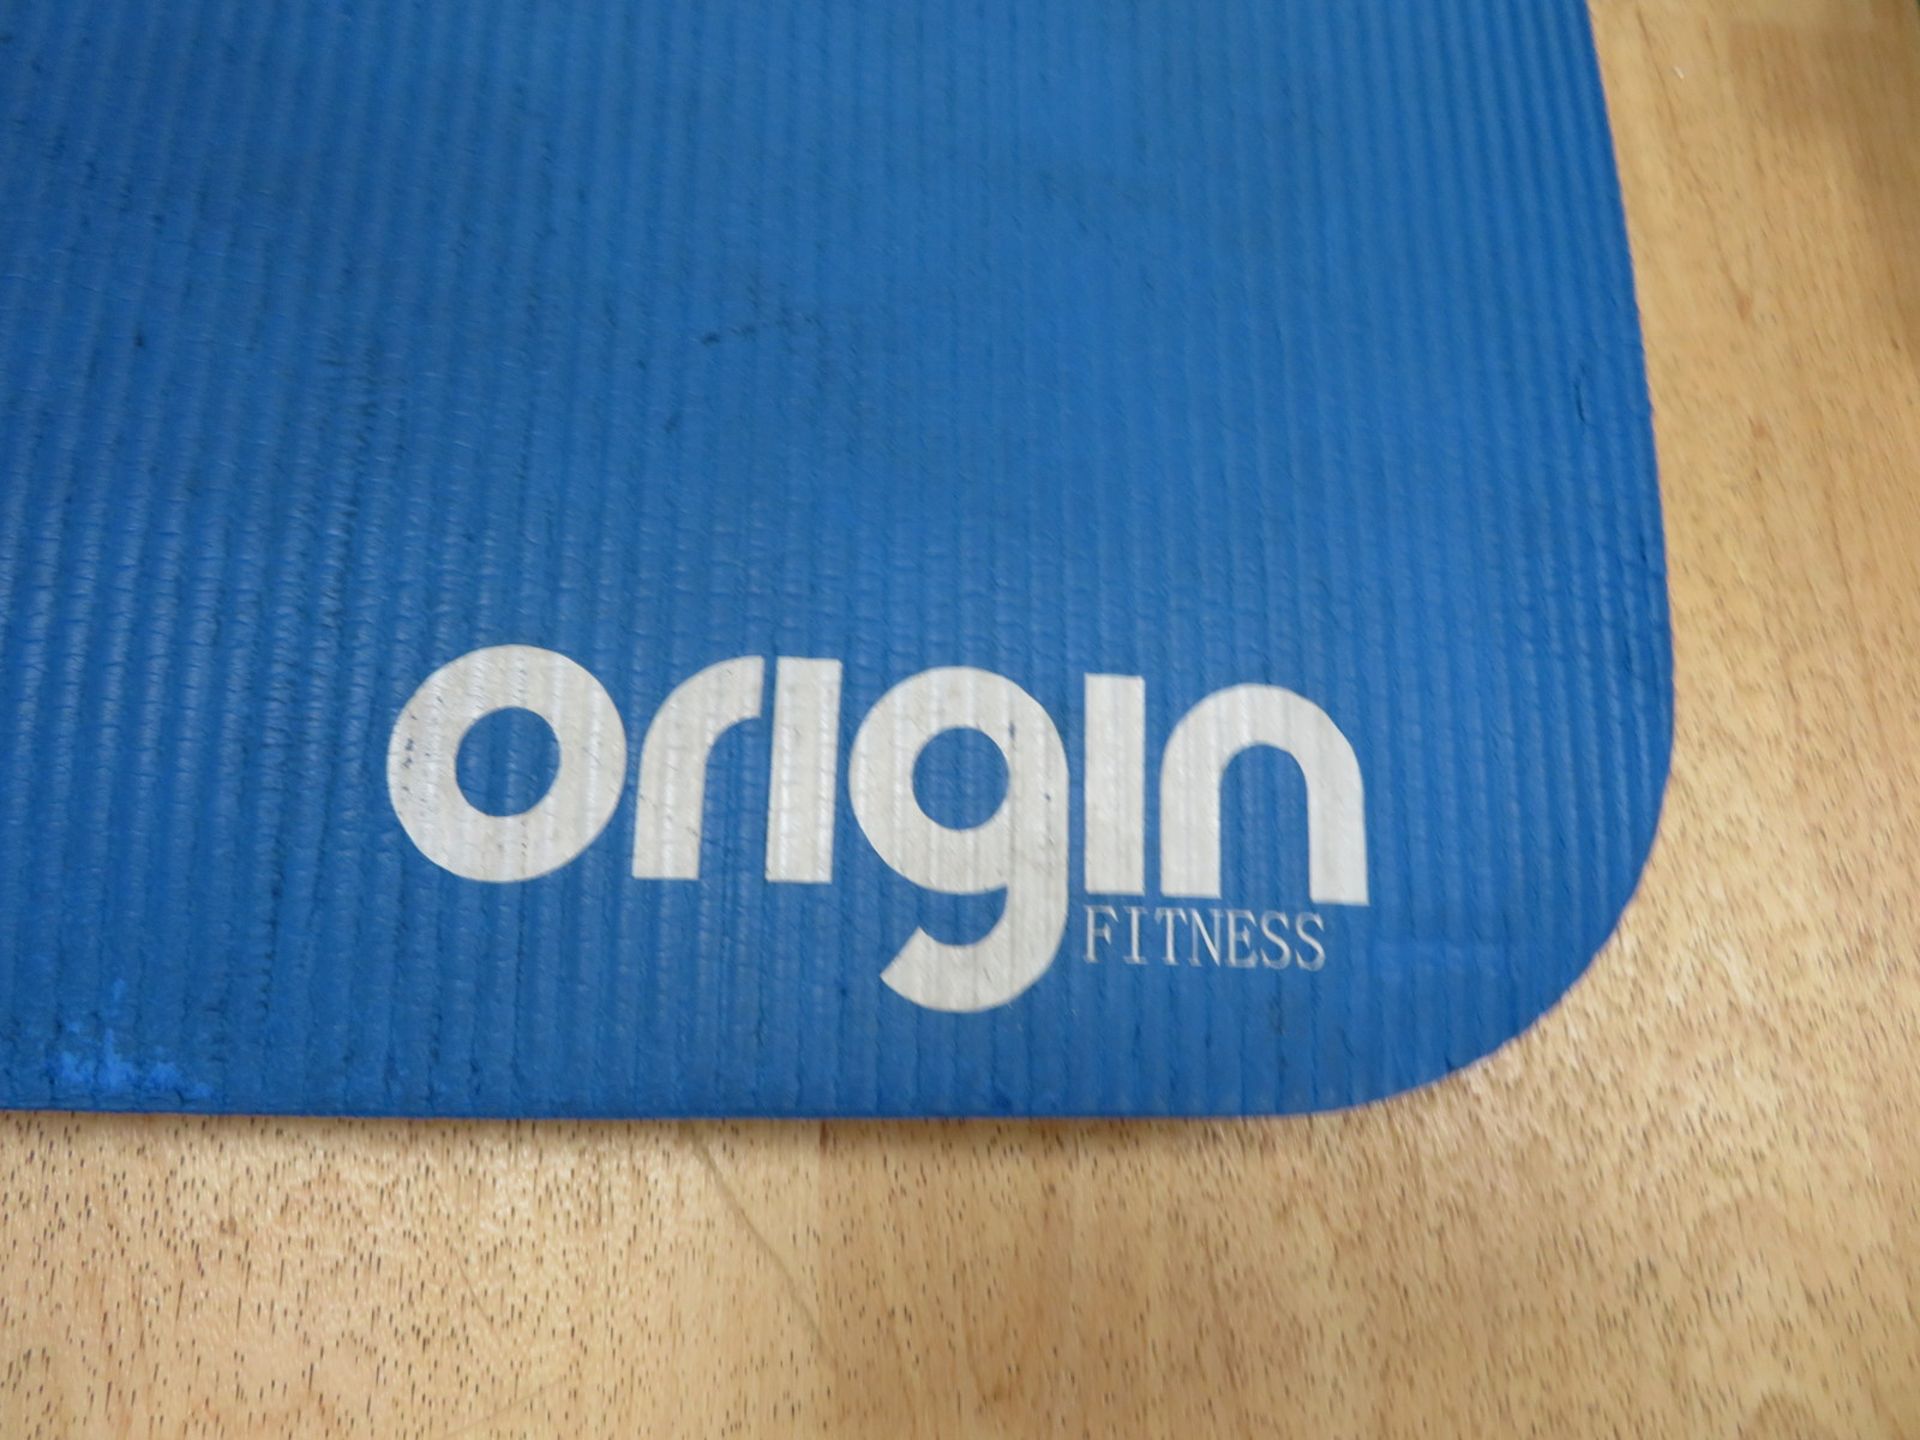 27x Origin Studio Fitness Mats. See Description For Quantities And Dimensions. - Image 3 of 7